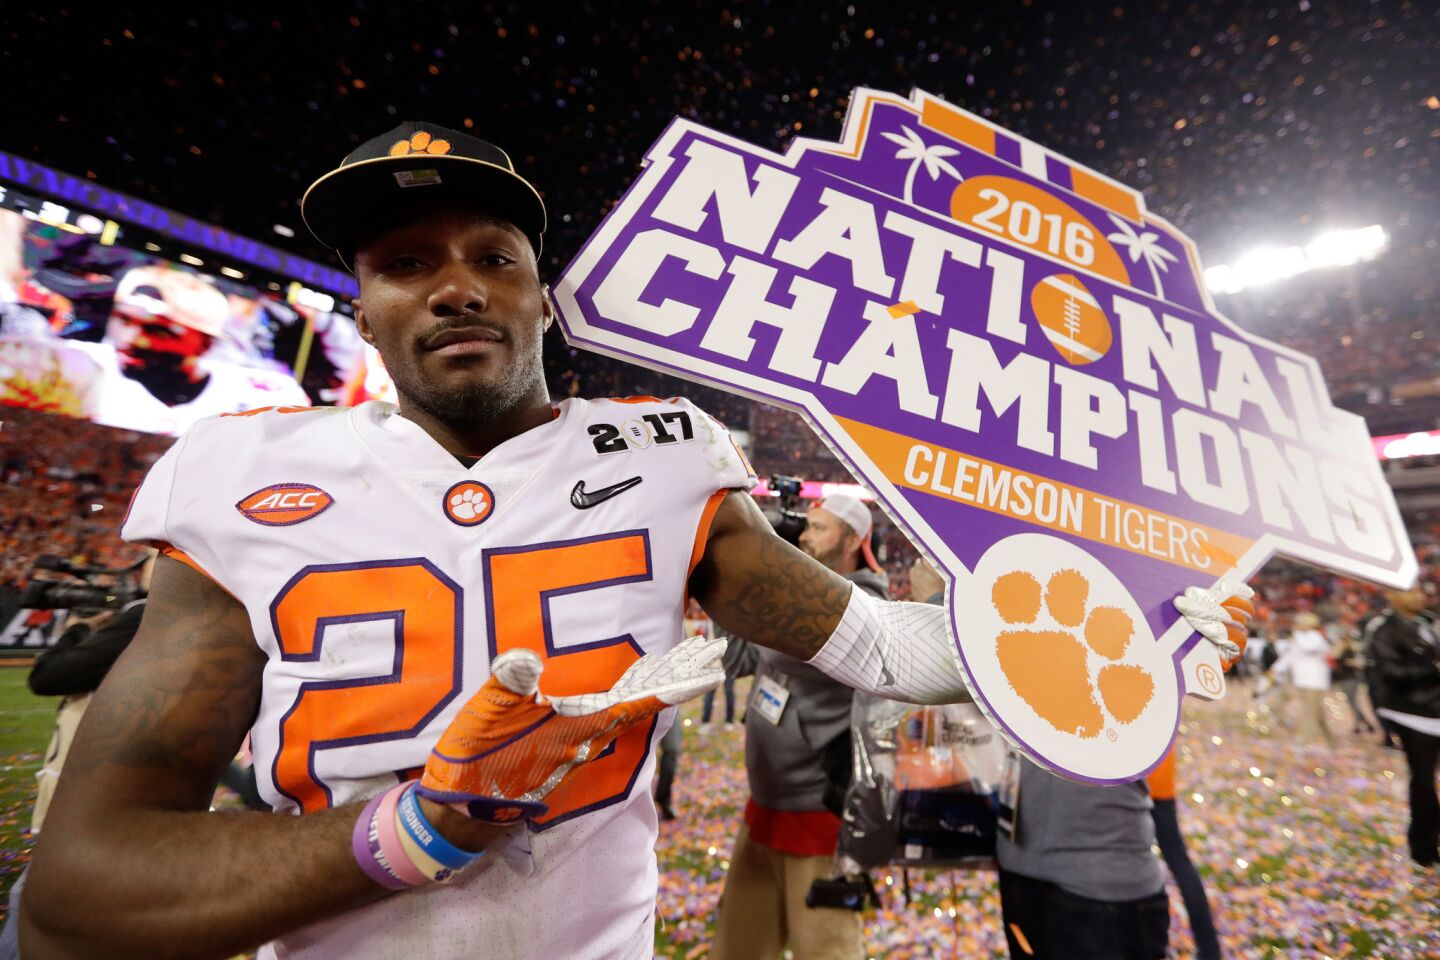 Clemson cornerback Cordrea Tankersley celebrates afterthe Tigers defeated the Alabama Crimson Tide, 35-31, to win the College Football Playoff national championship game.